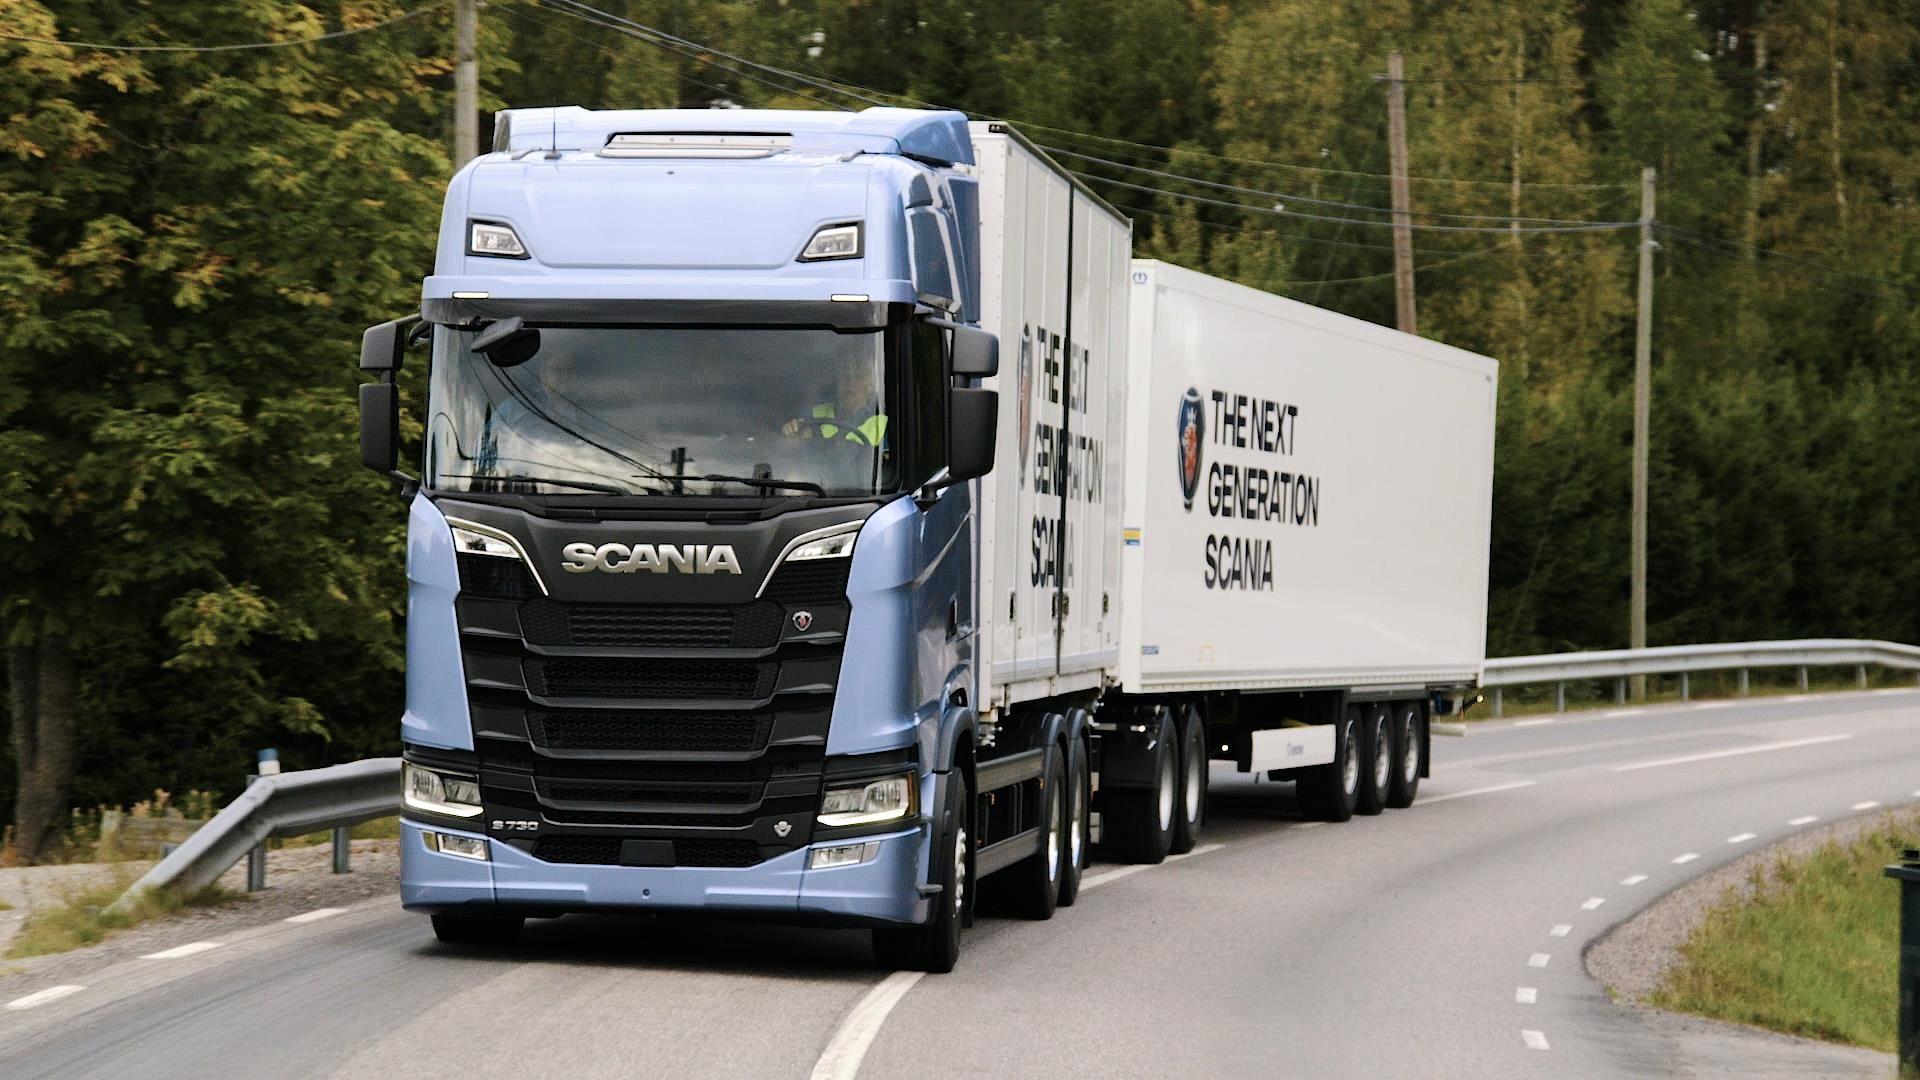 Transport writers take Scania's New Truck Generation out on the road